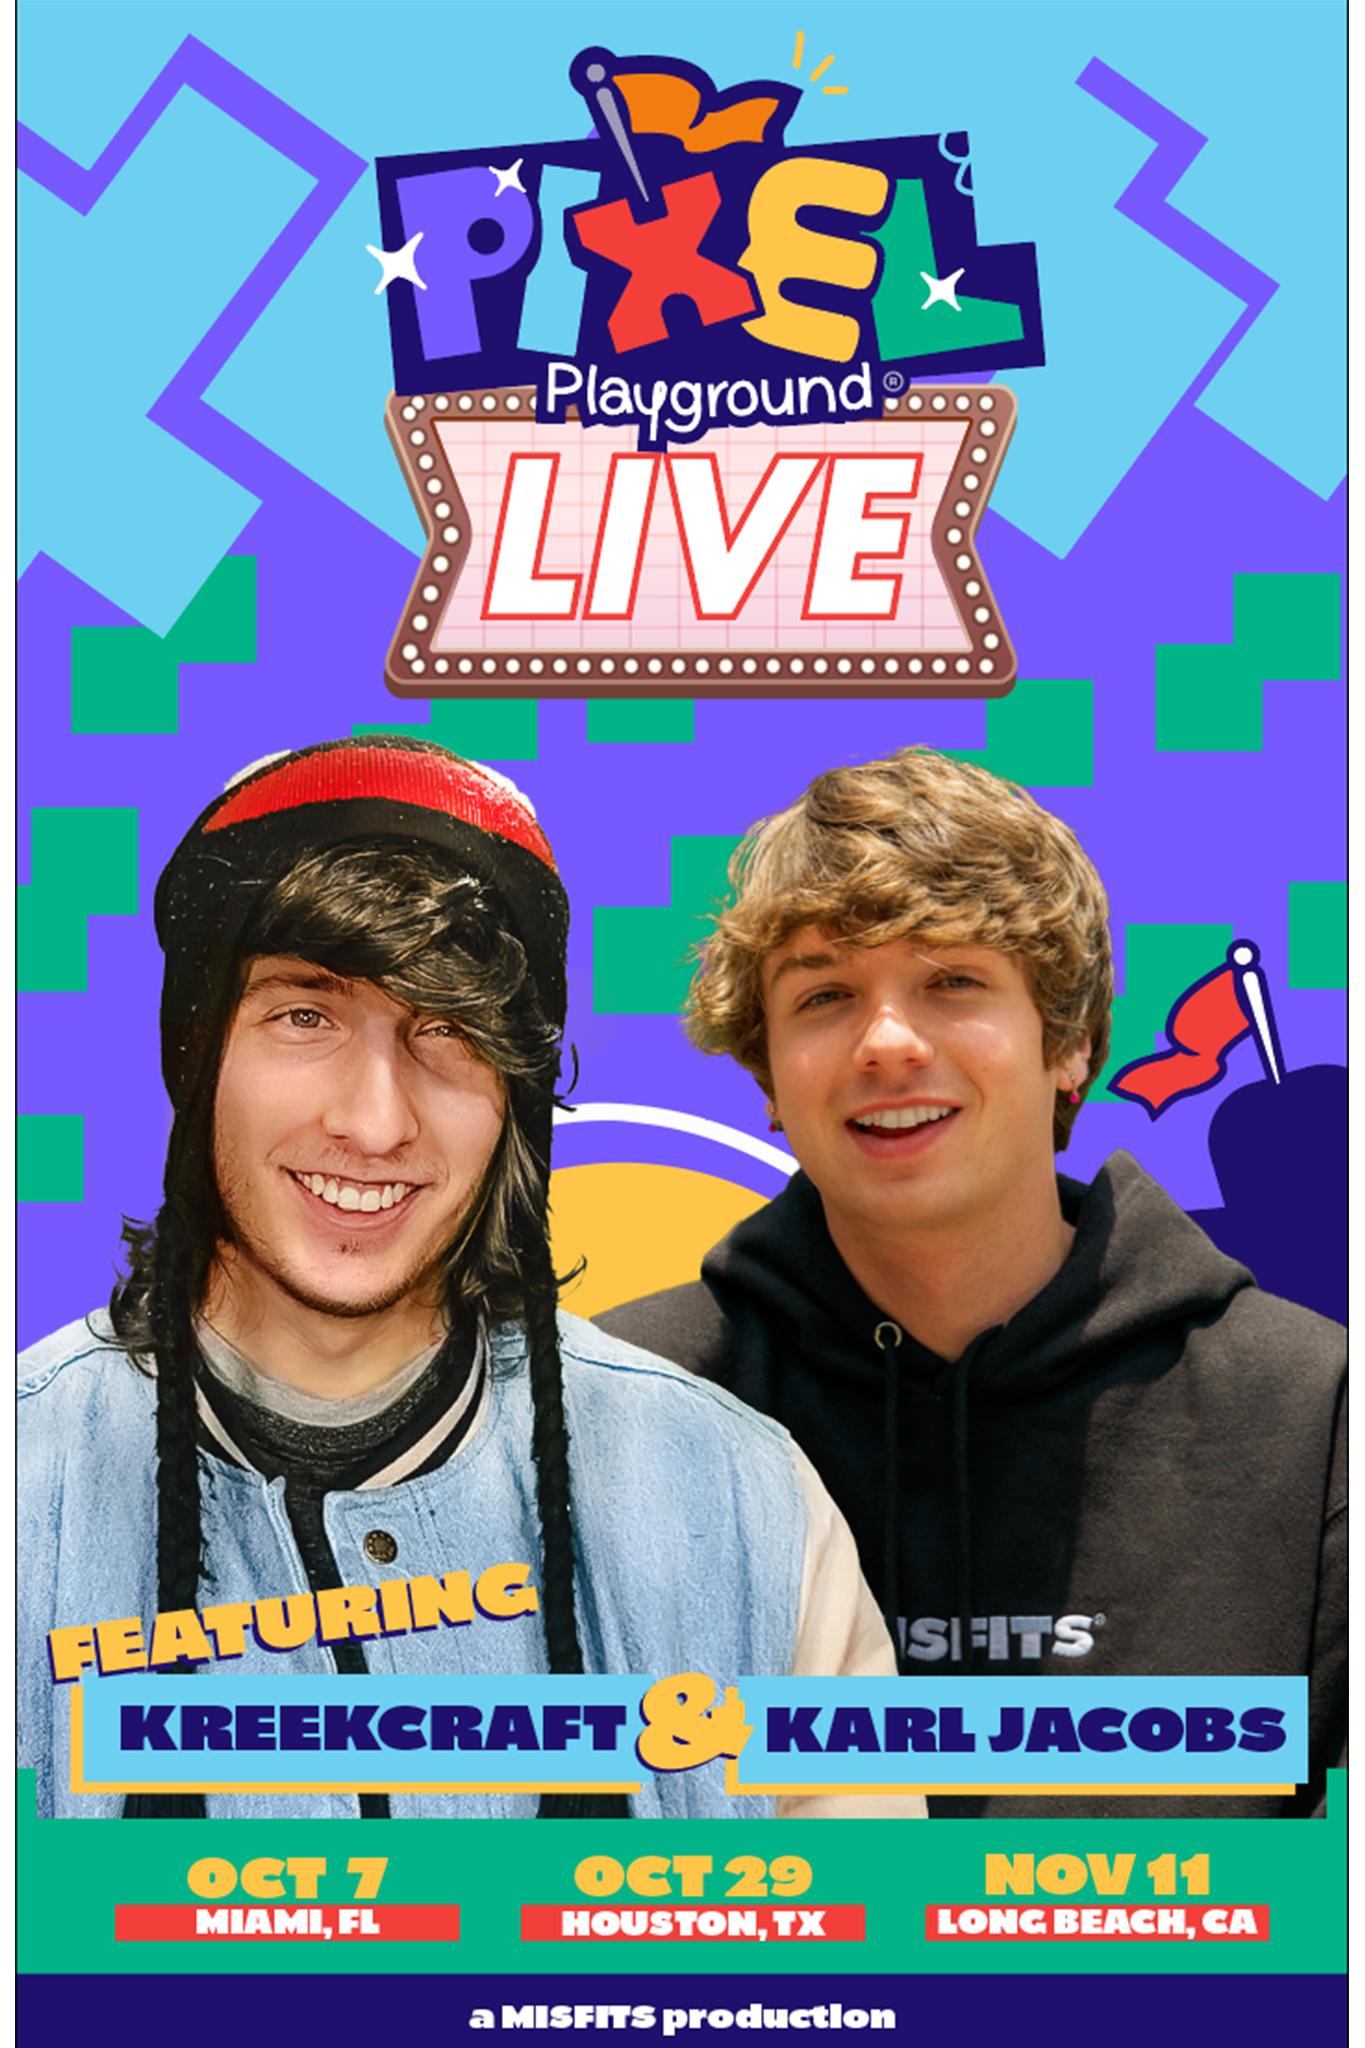 This image is a promotional poster for a live event named "PIXEL Playground LIVE," featuring personalities KreekCraft and Karl Jacobs. The background is vibrant with pixelated patterns and bold, colorful text announcing the event dates and locations in Miami, Houston, and Long Beach. The poster is produced by MISFITS. The two featured individuals are smiling in the foreground.